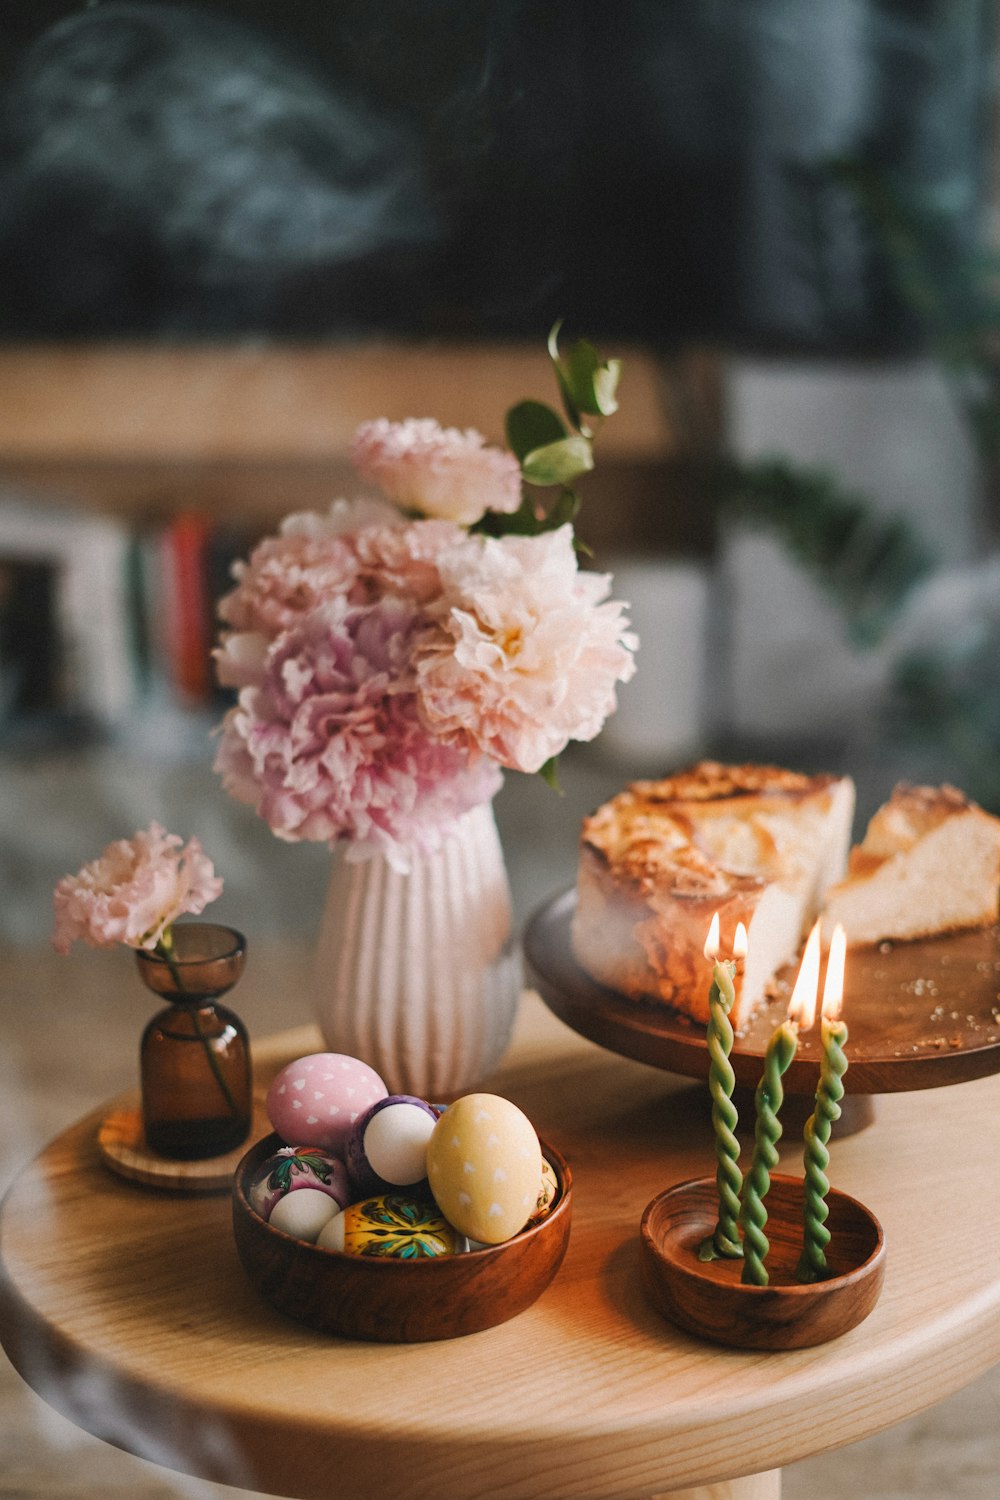 a table topped with a cake and a vase filled with flowers